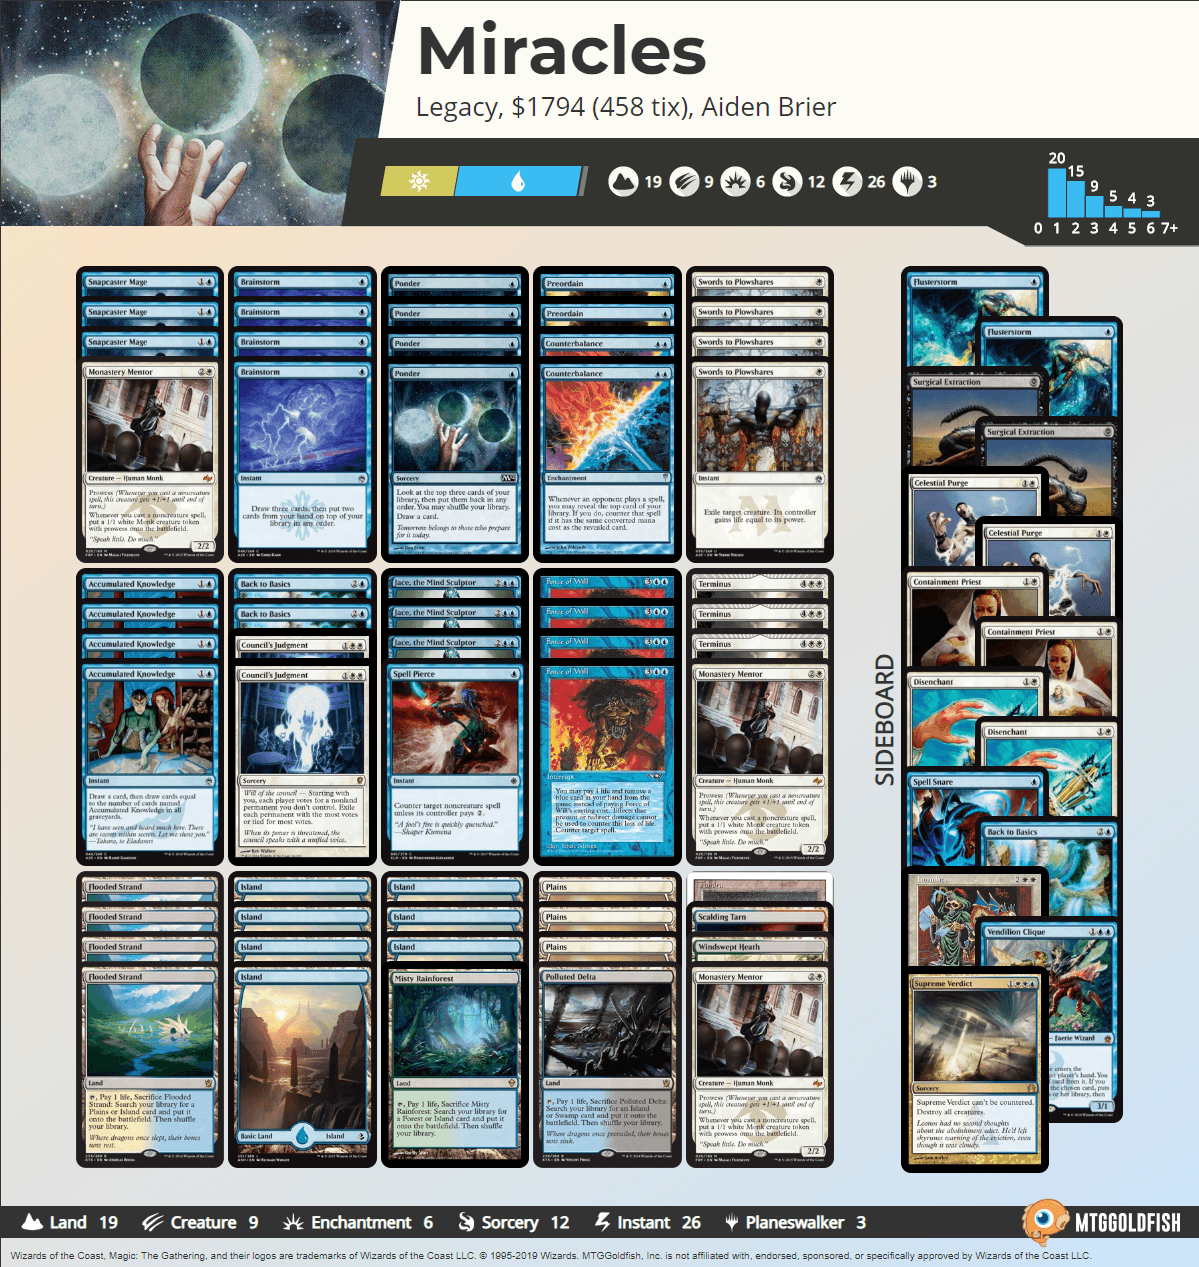 Brier+Miracles+layout